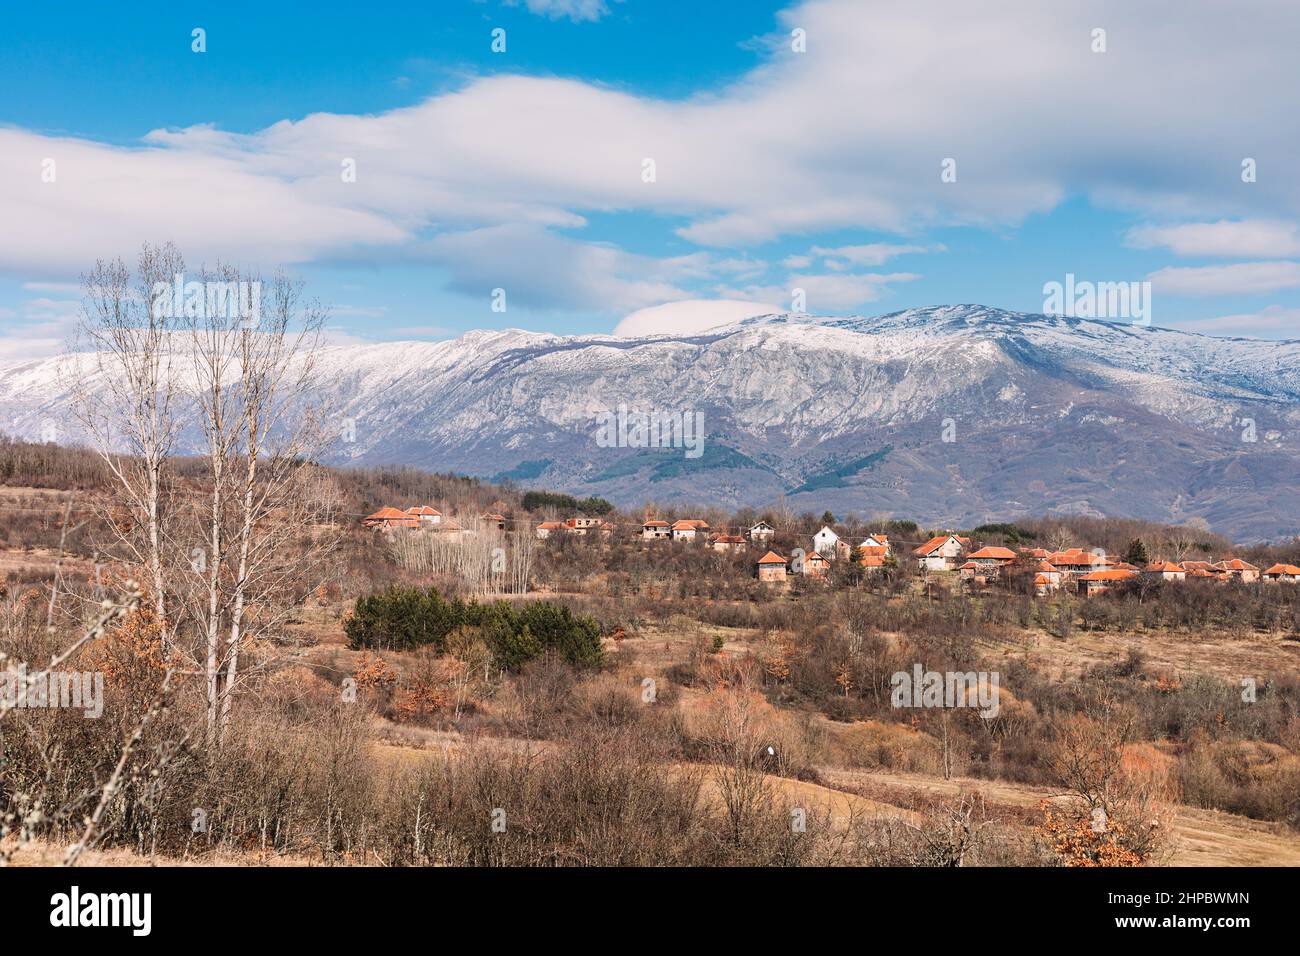 Landscape scenery of Dry Mountain in Eastern Serbia with village houses in the valley Stock Photo